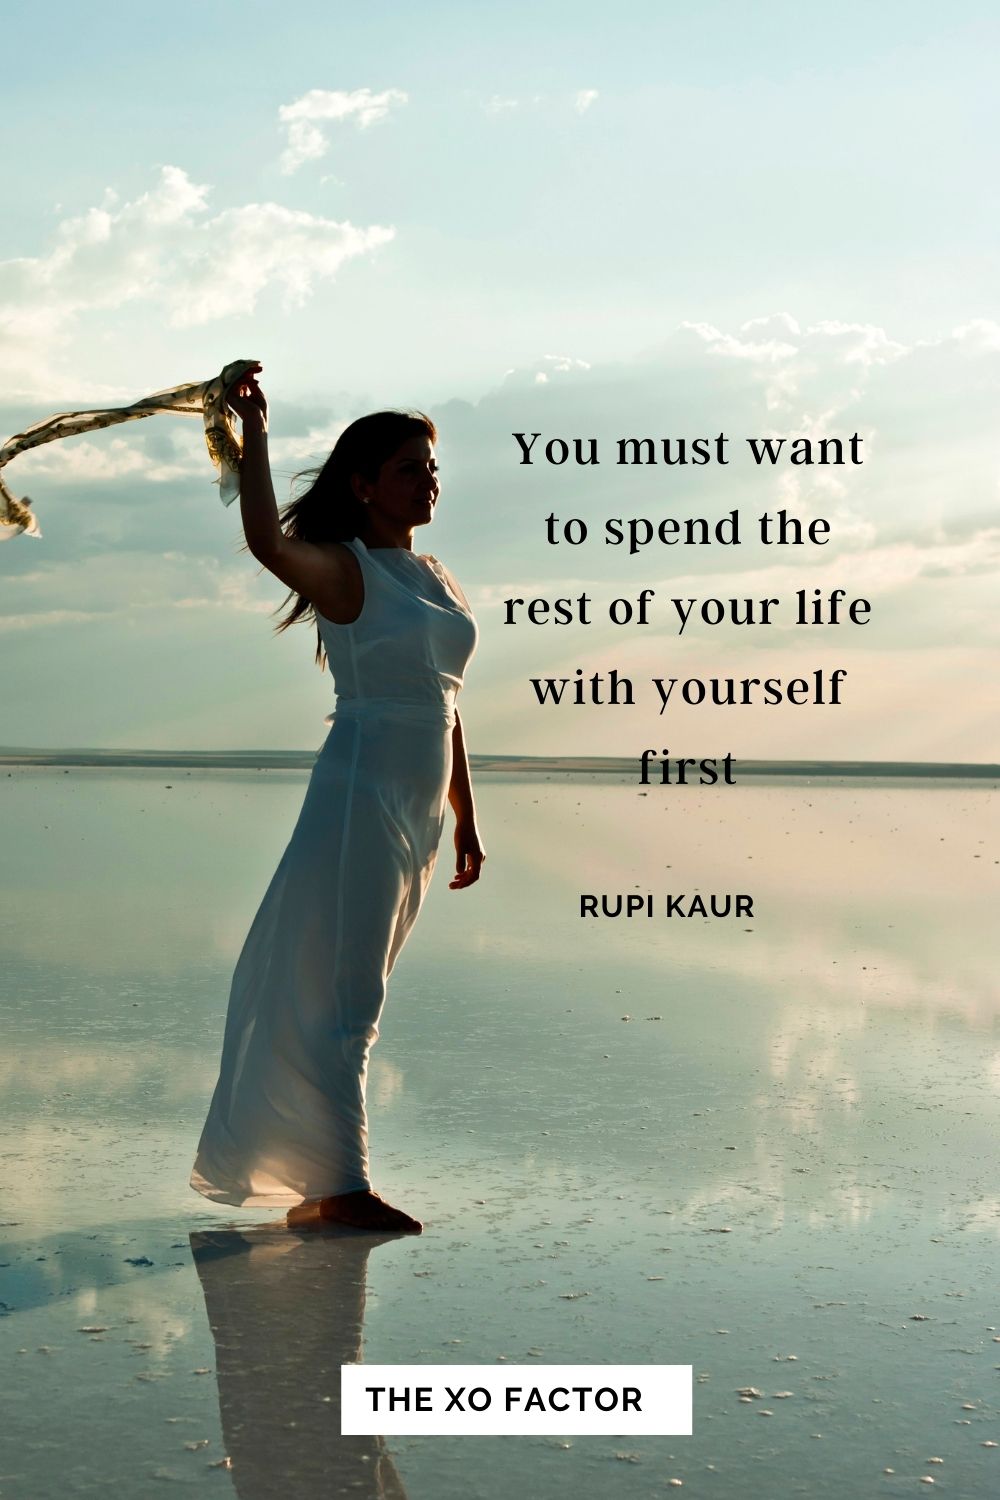 You must want to spend the rest of your life with yourself first. Rupi Kaur